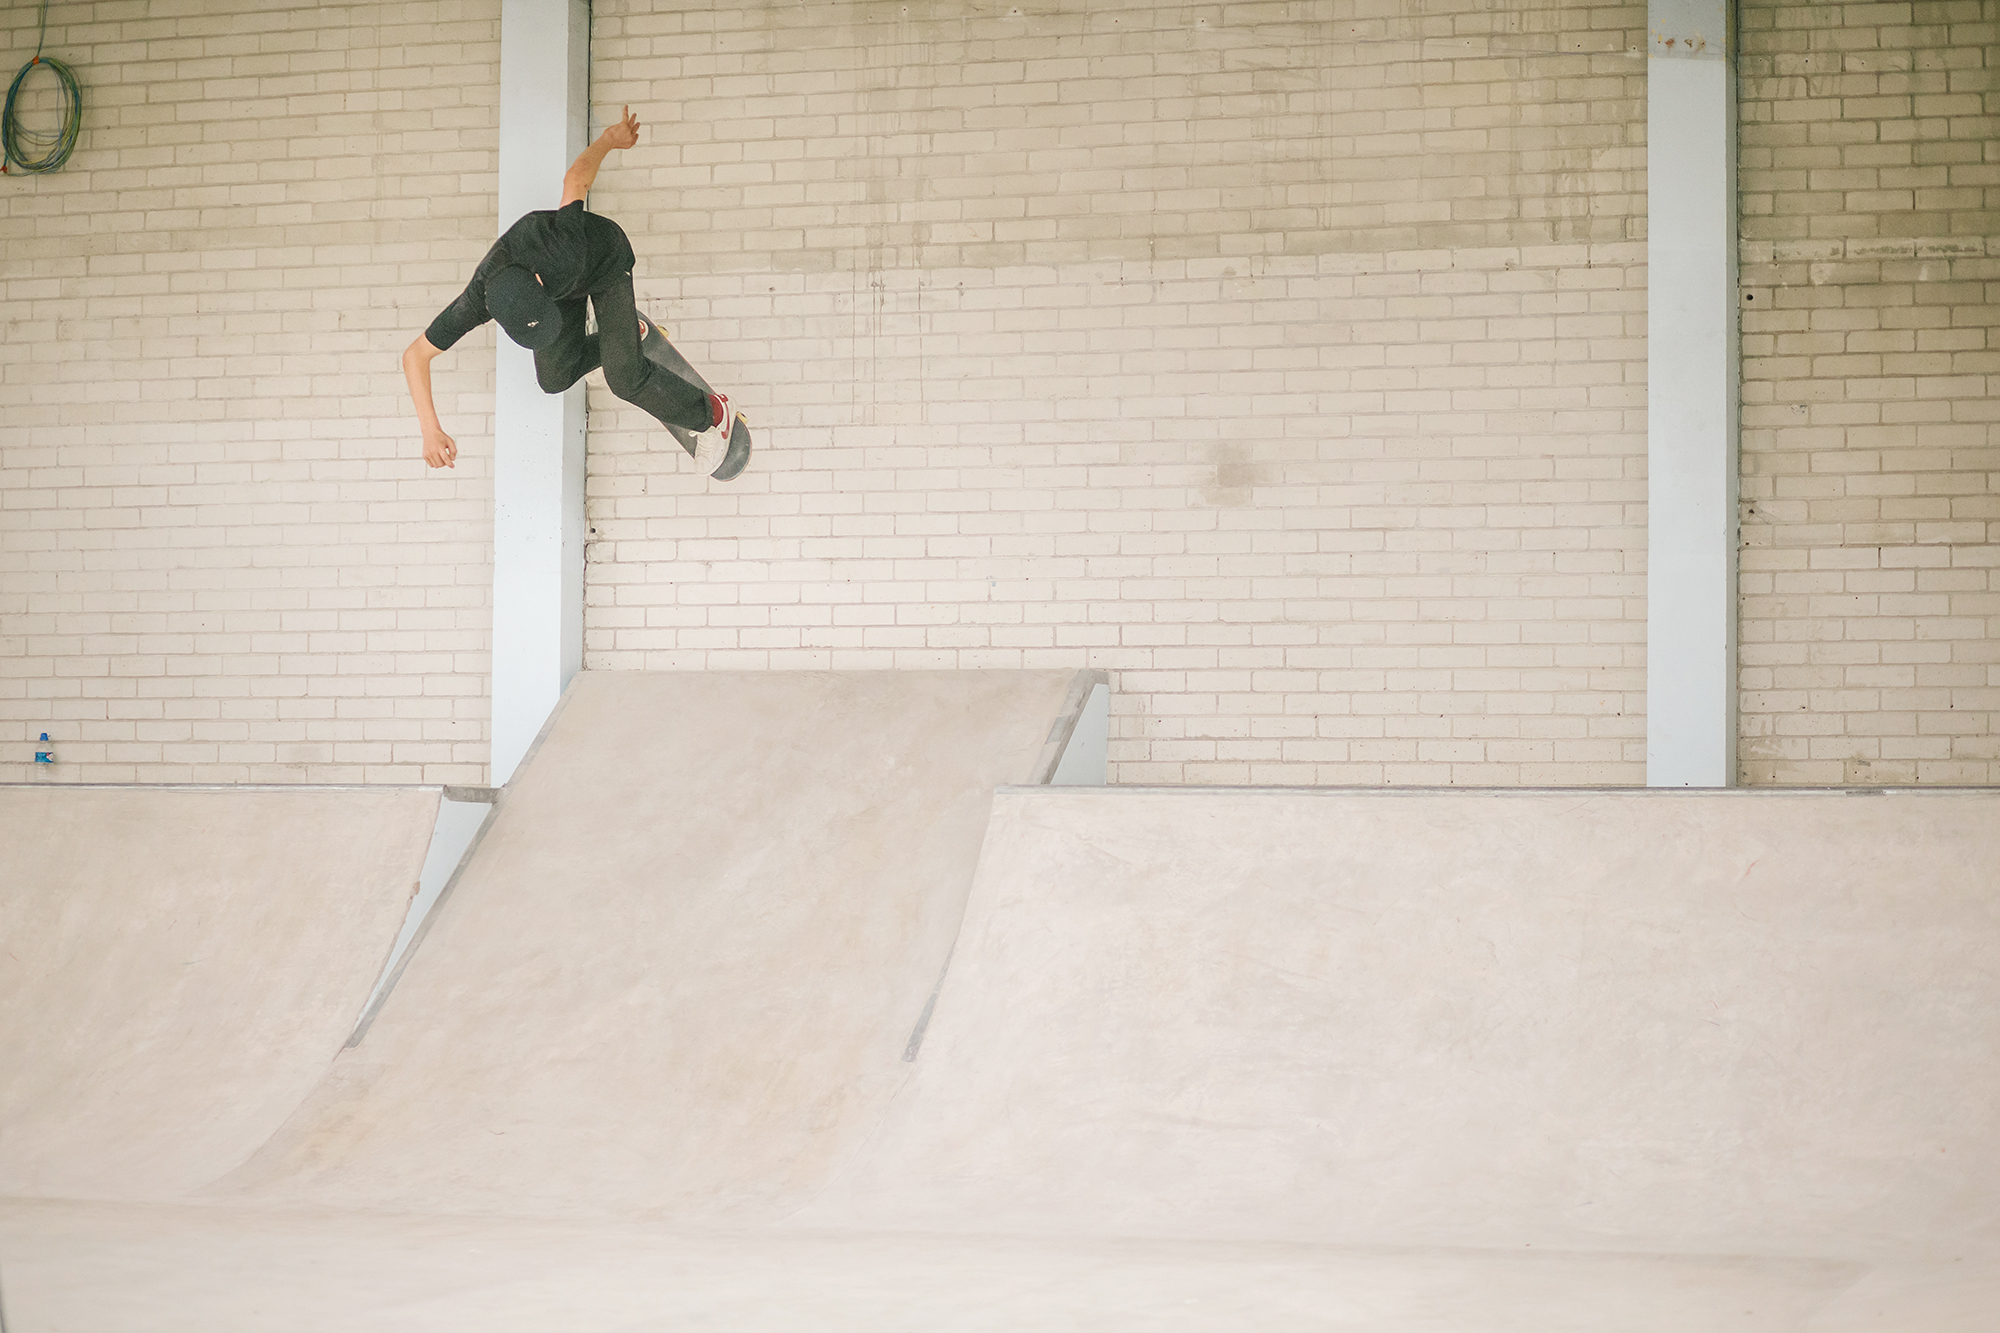 Charlie Birch - ollie out to wallride